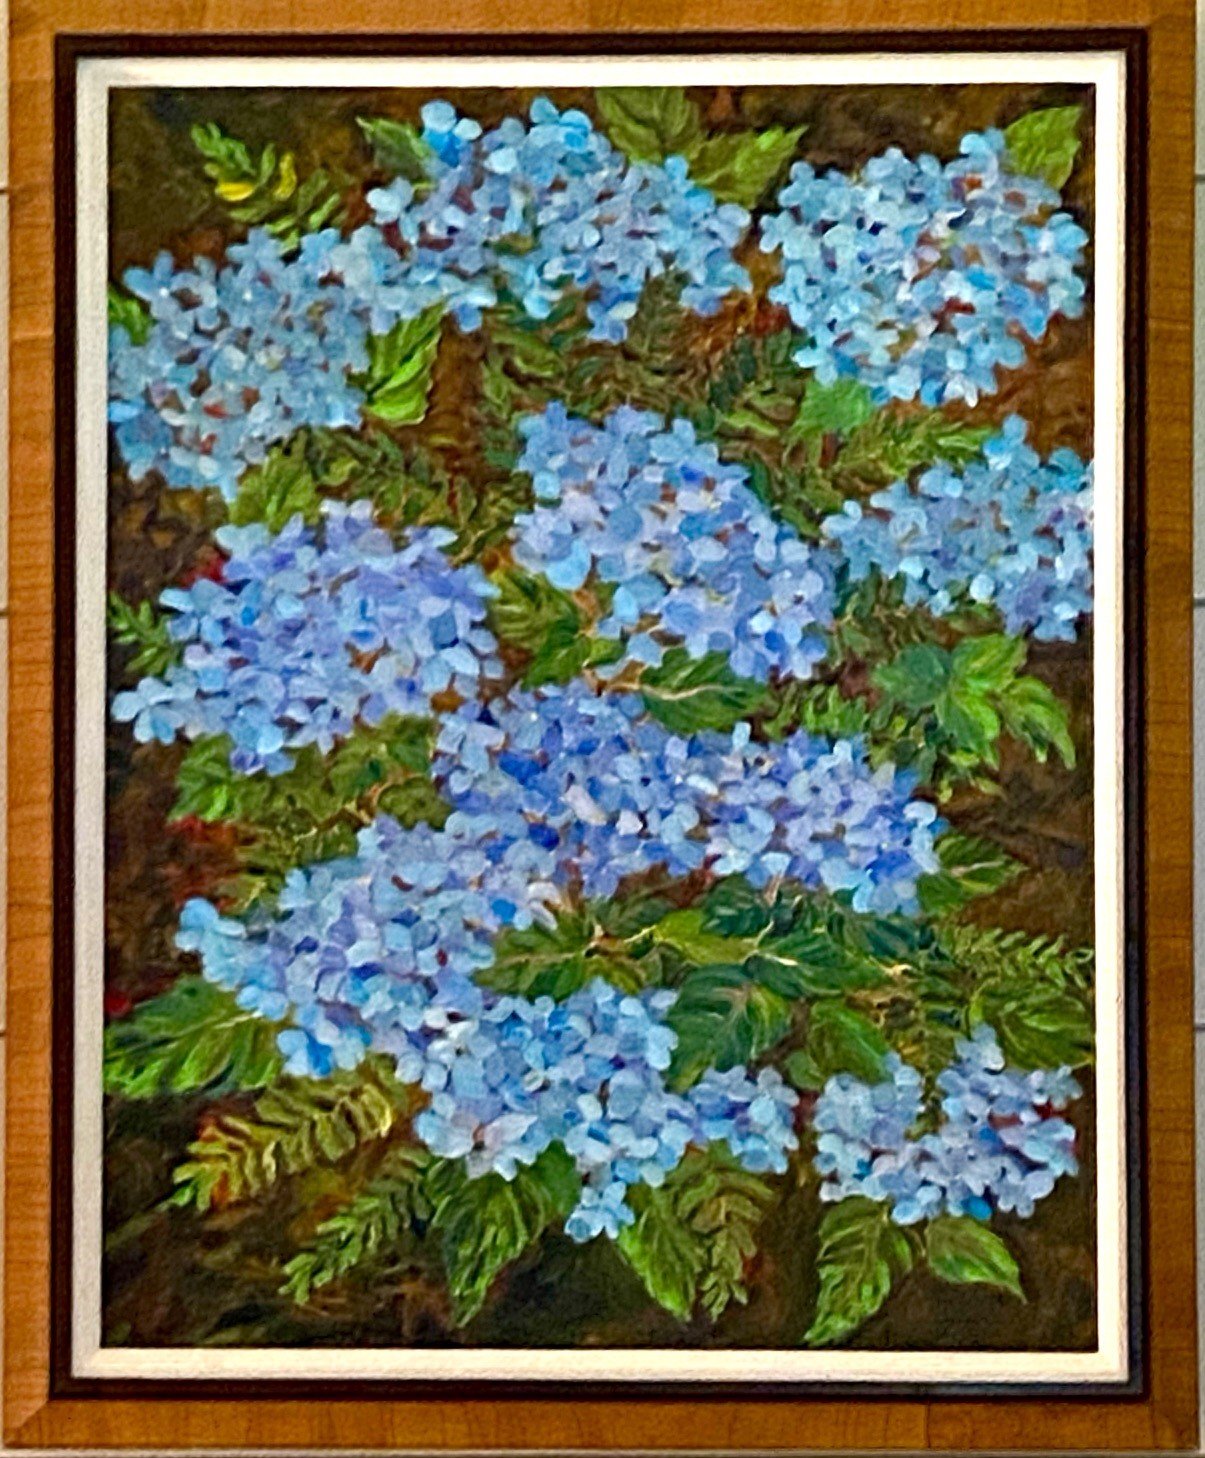 Flowers are among Charlotte Chastain's favorite subjects to paint.